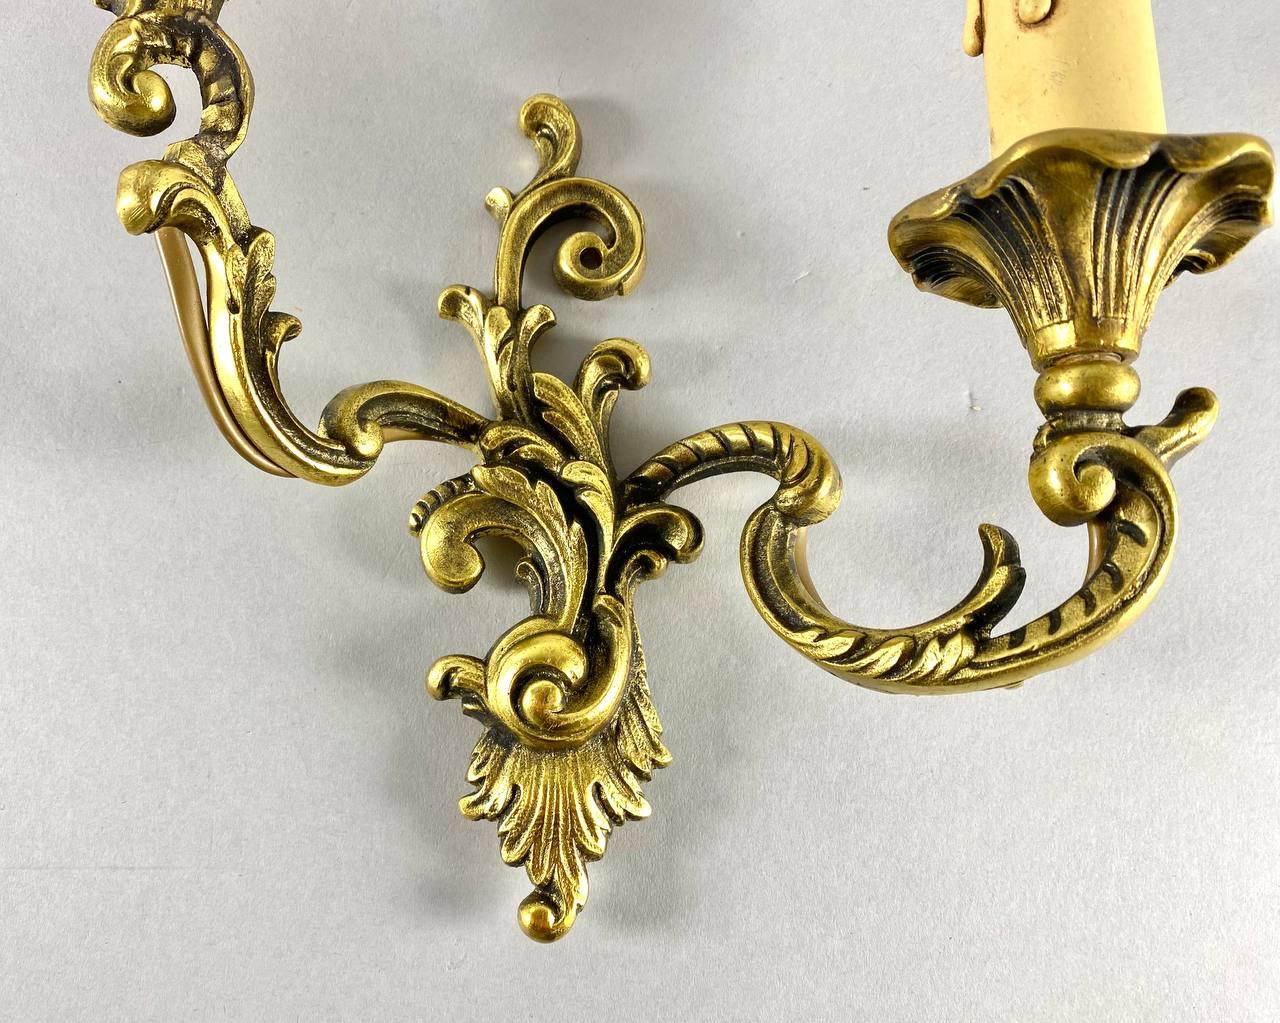 Elegant Vintage Gilt Brass Wall Sconce Two Arm Single Wall Lamp In Excellent Condition For Sale In Bastogne, BE